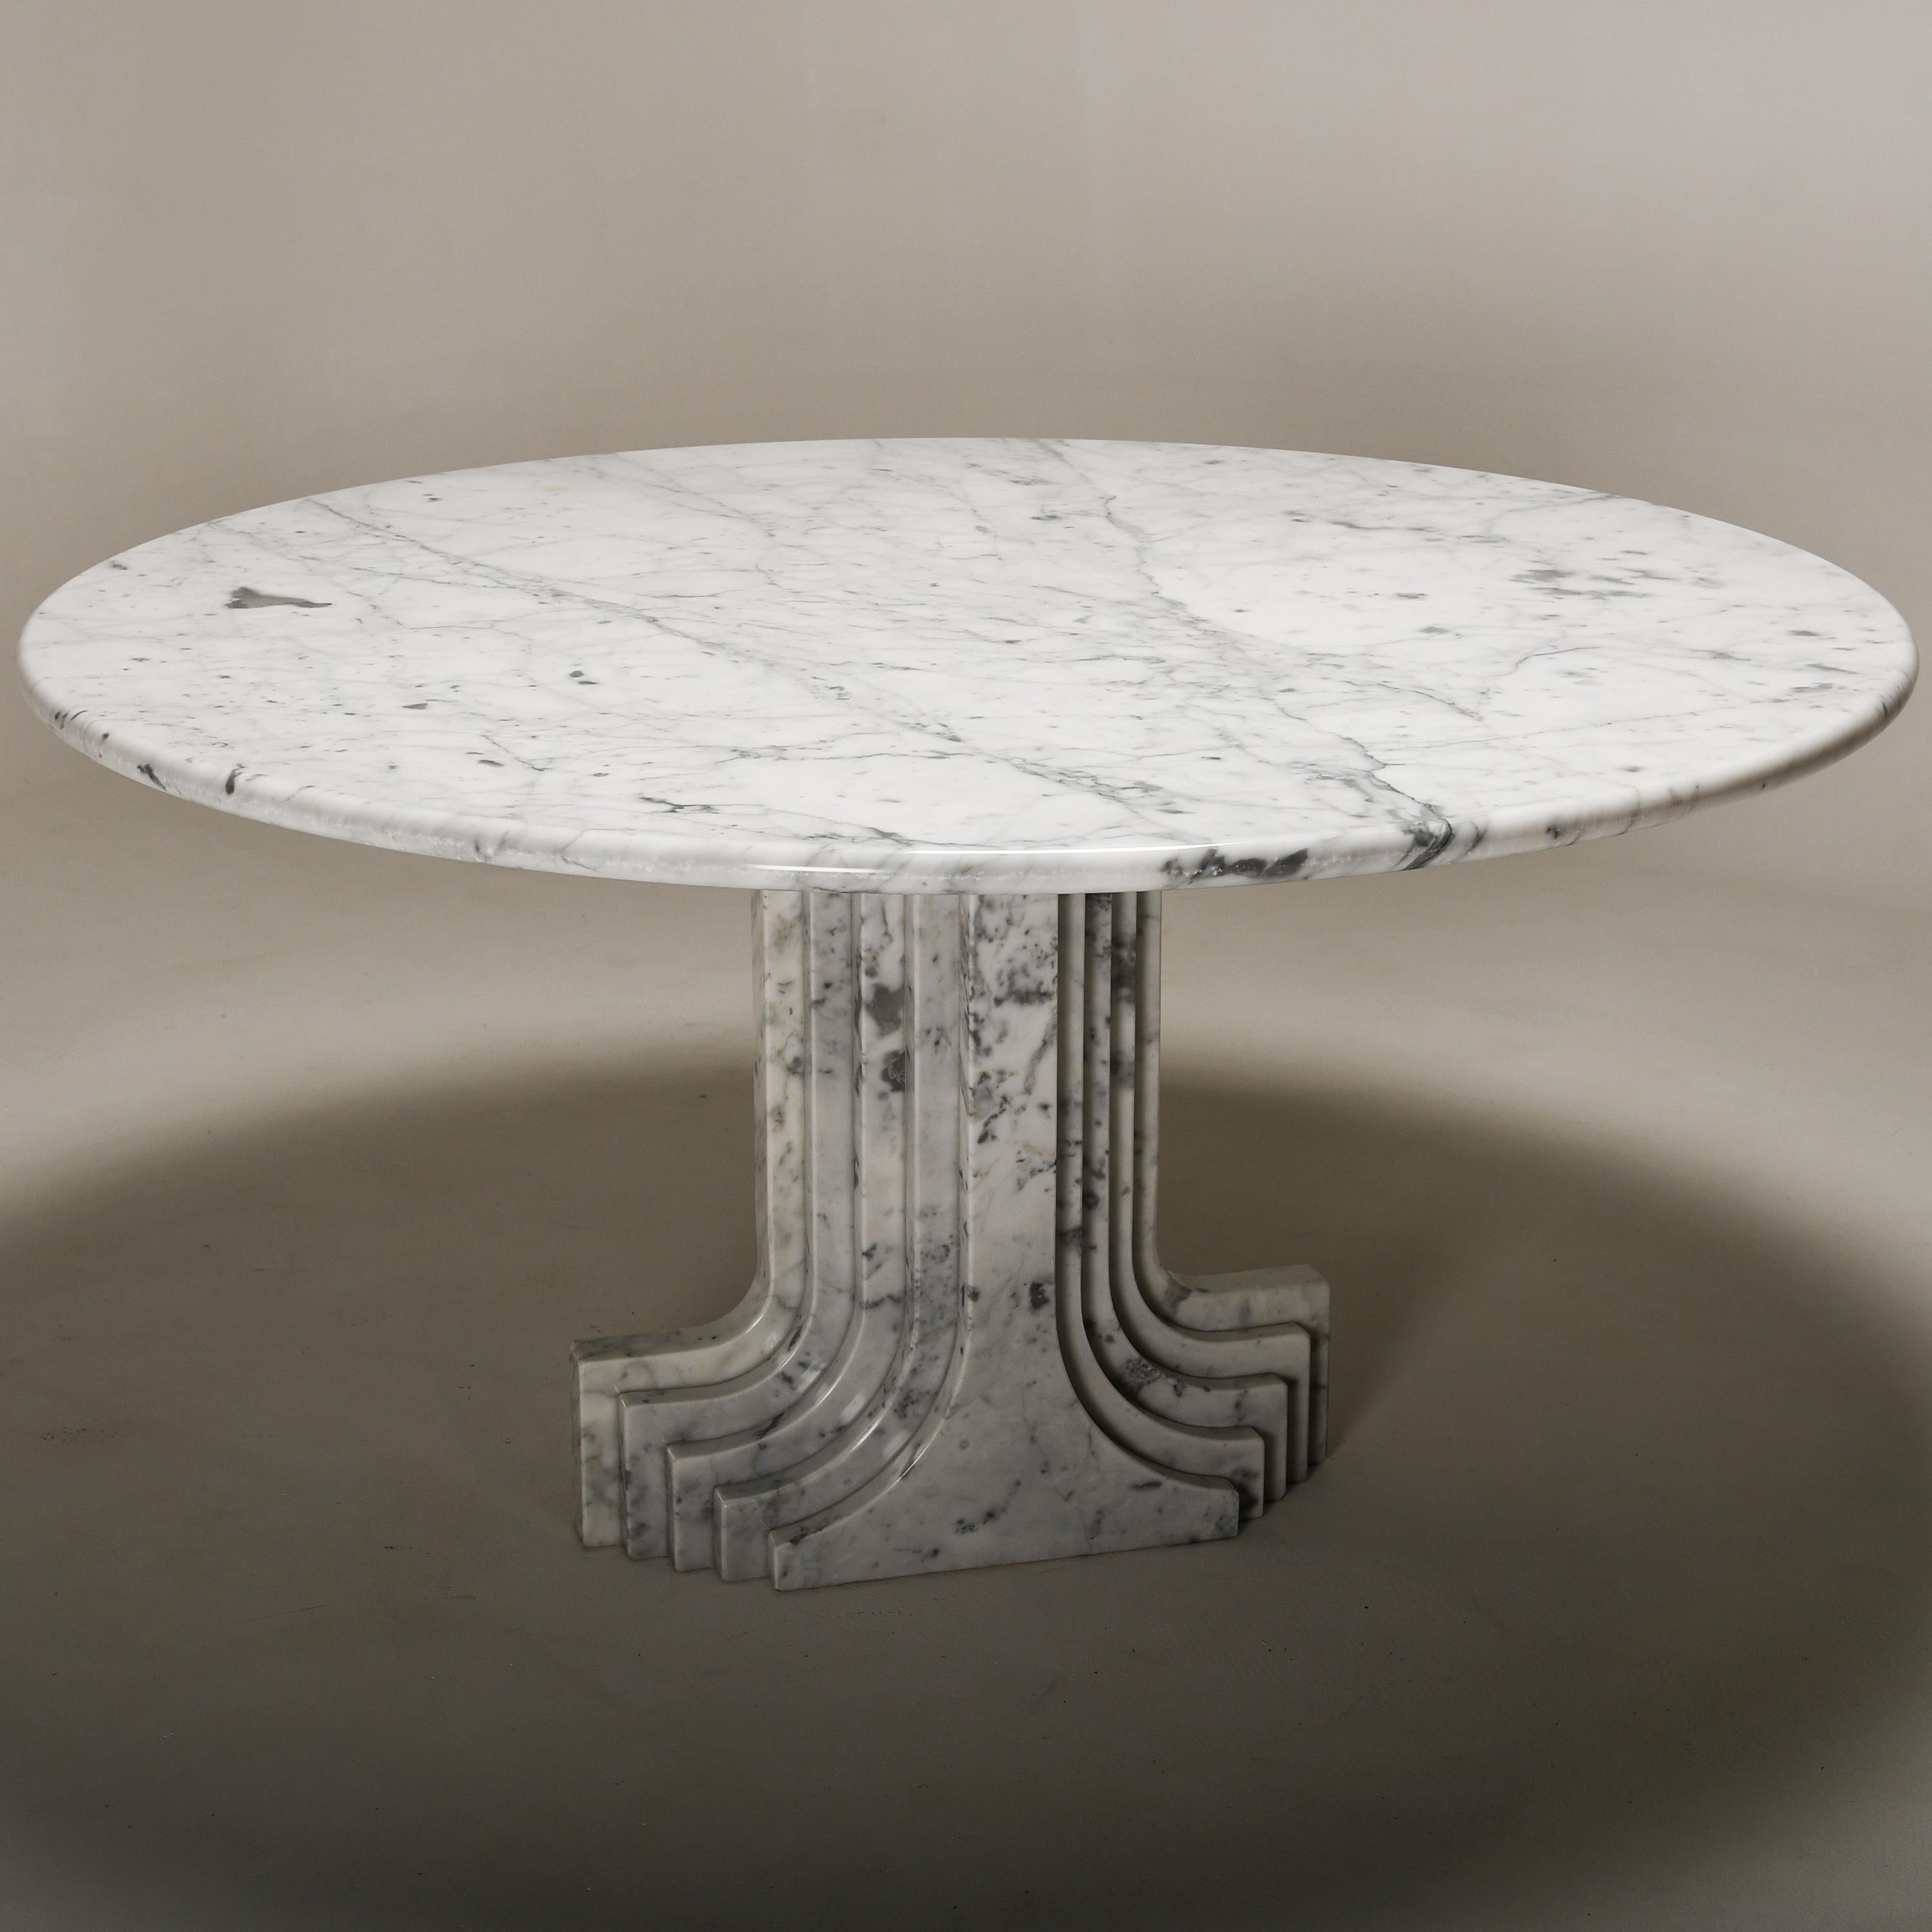 This table is the large round version of the Samo serie. 
Made of a first choice block of Carrara marble, with spectacular veins and grain.
Scarpa's reinterpretation of classical architecture is a milestone of modern design.
 